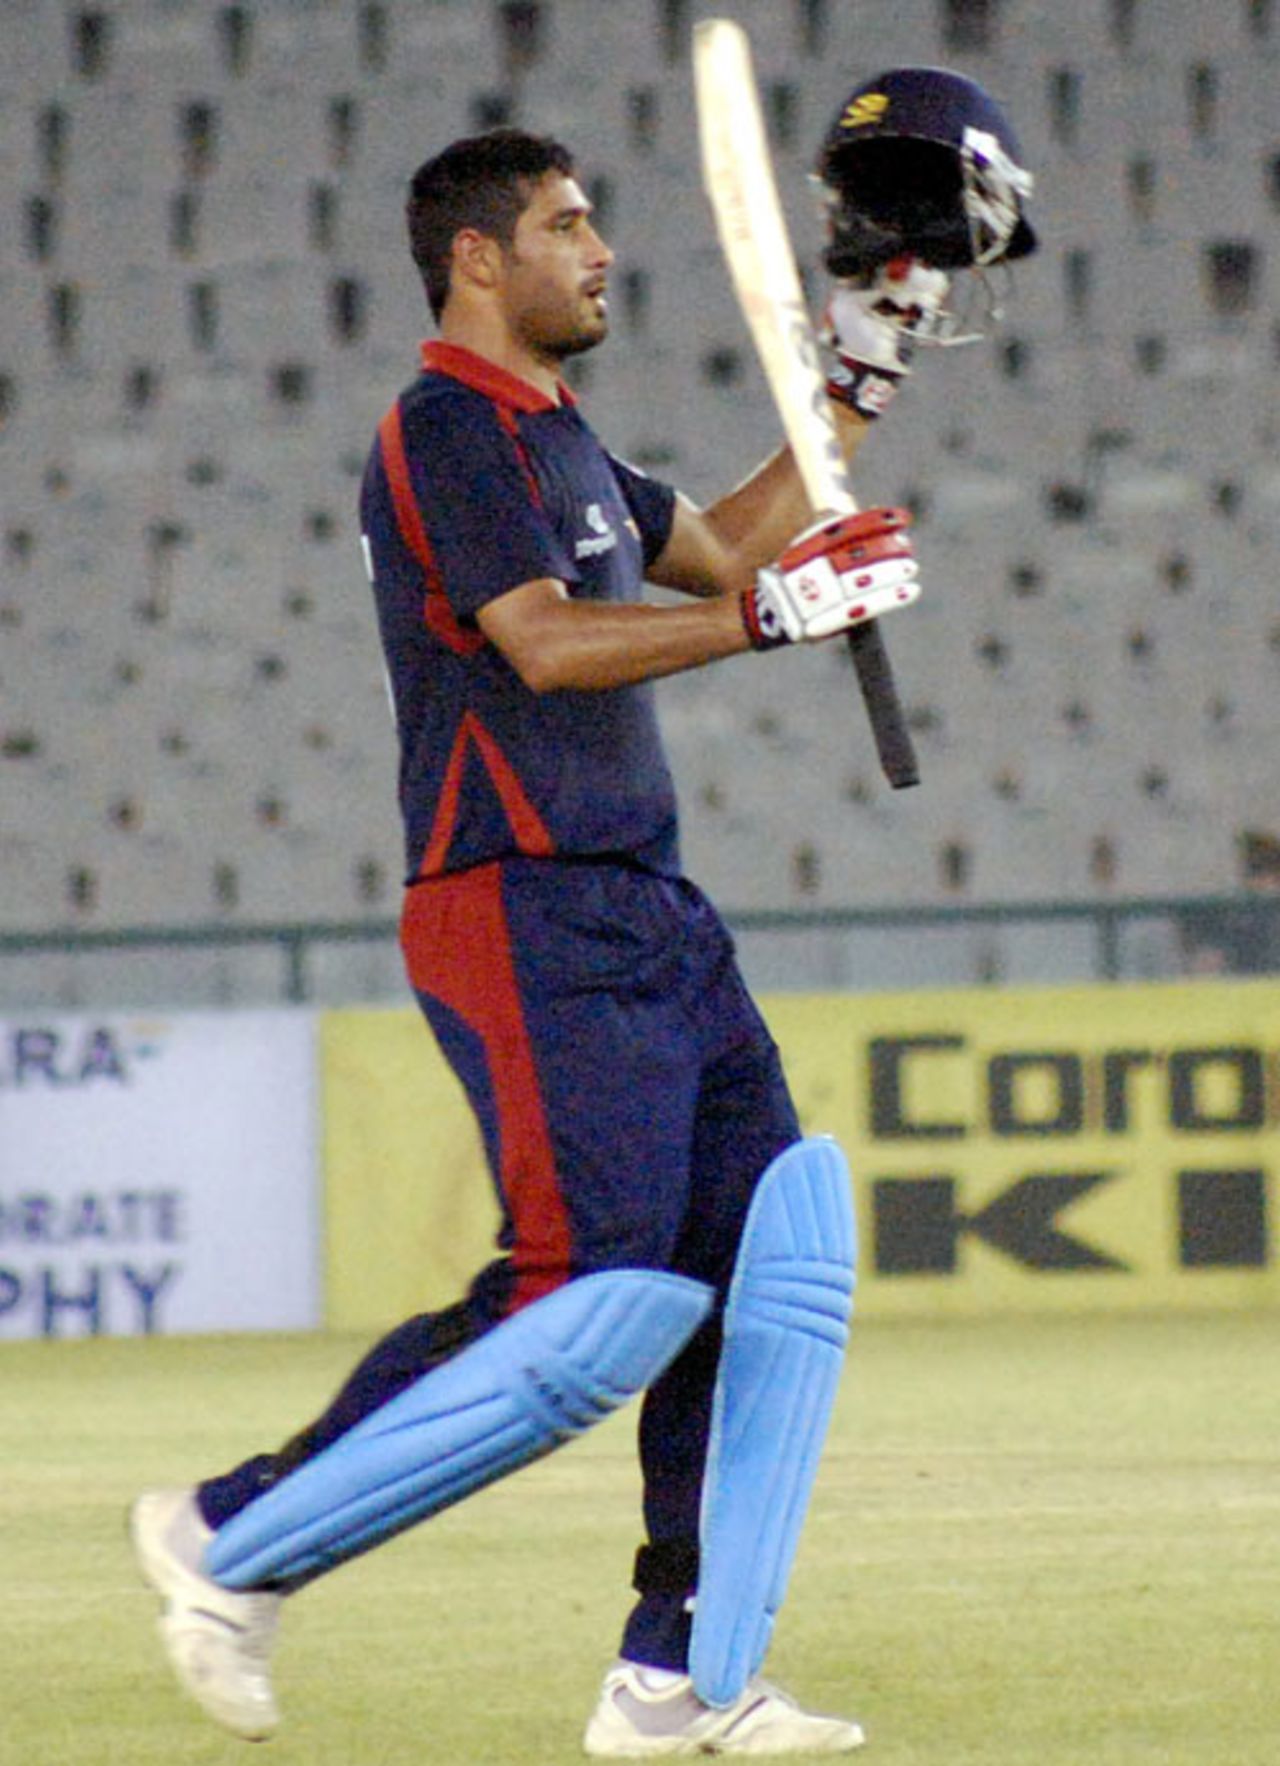 Chandan Madan's century made sure Air India Blue were rarely in trouble, Air India Blue v Tata Sports Club, BCCI Corporate Trophy, Mohali, September 6, 2009 